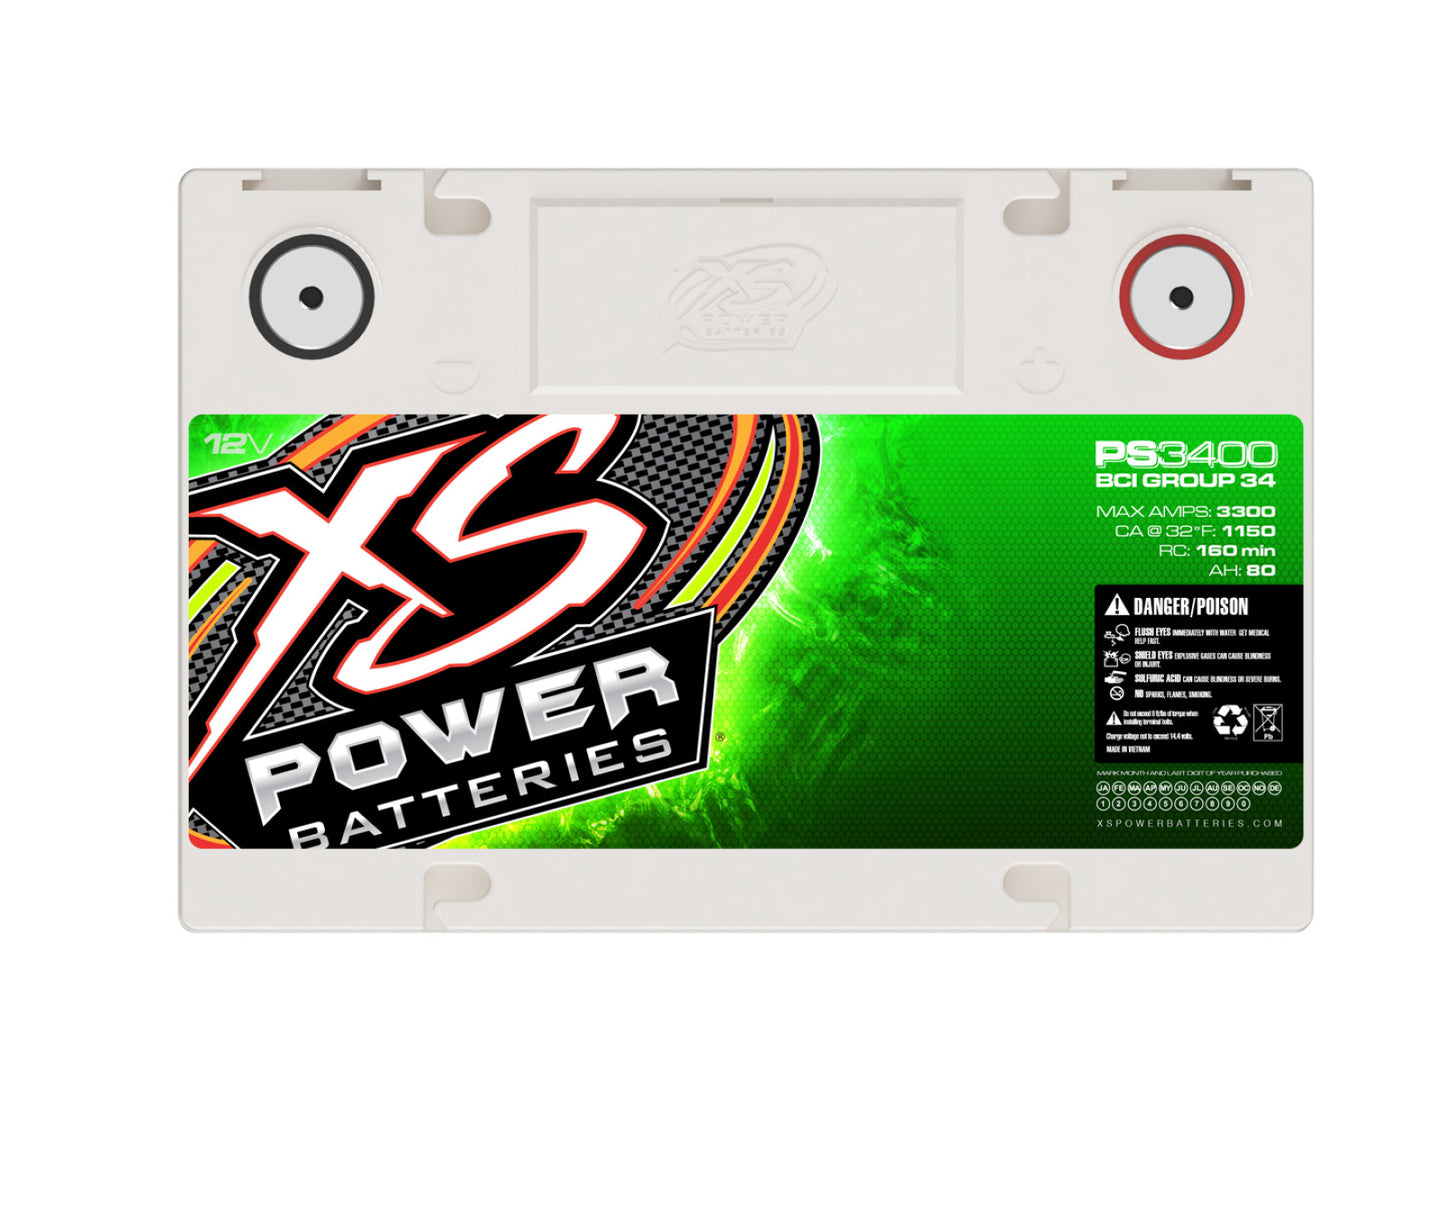 XS Power Batteries 12V AGM Powersports Series Batteries - M6 Terminal Bolts Included 3300 Max Amps